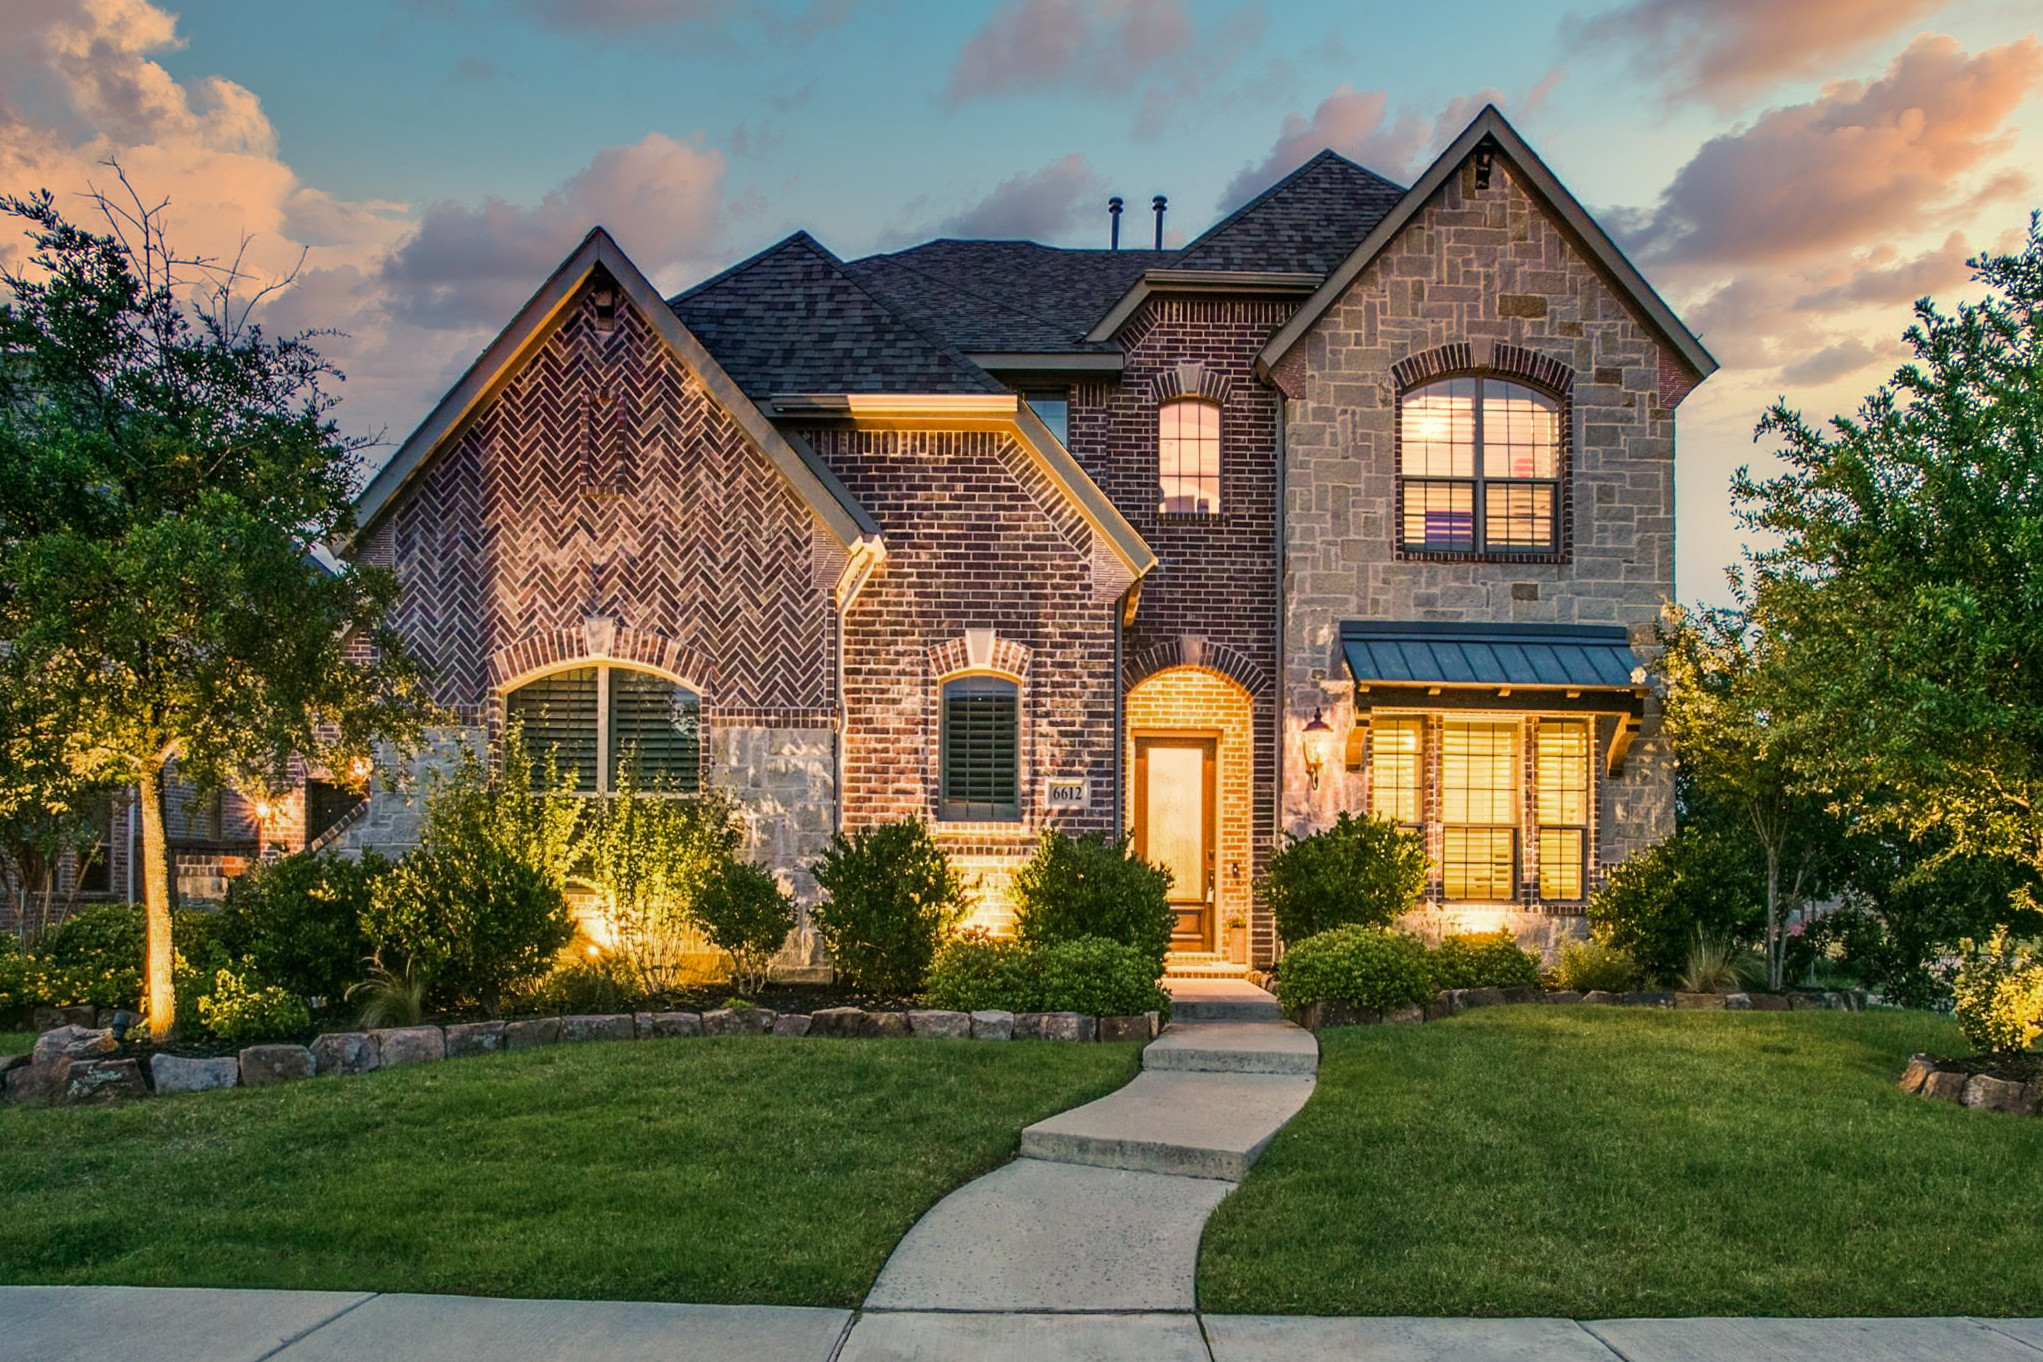 Image taken at dusk of the front of a 2-story home in Frisco.